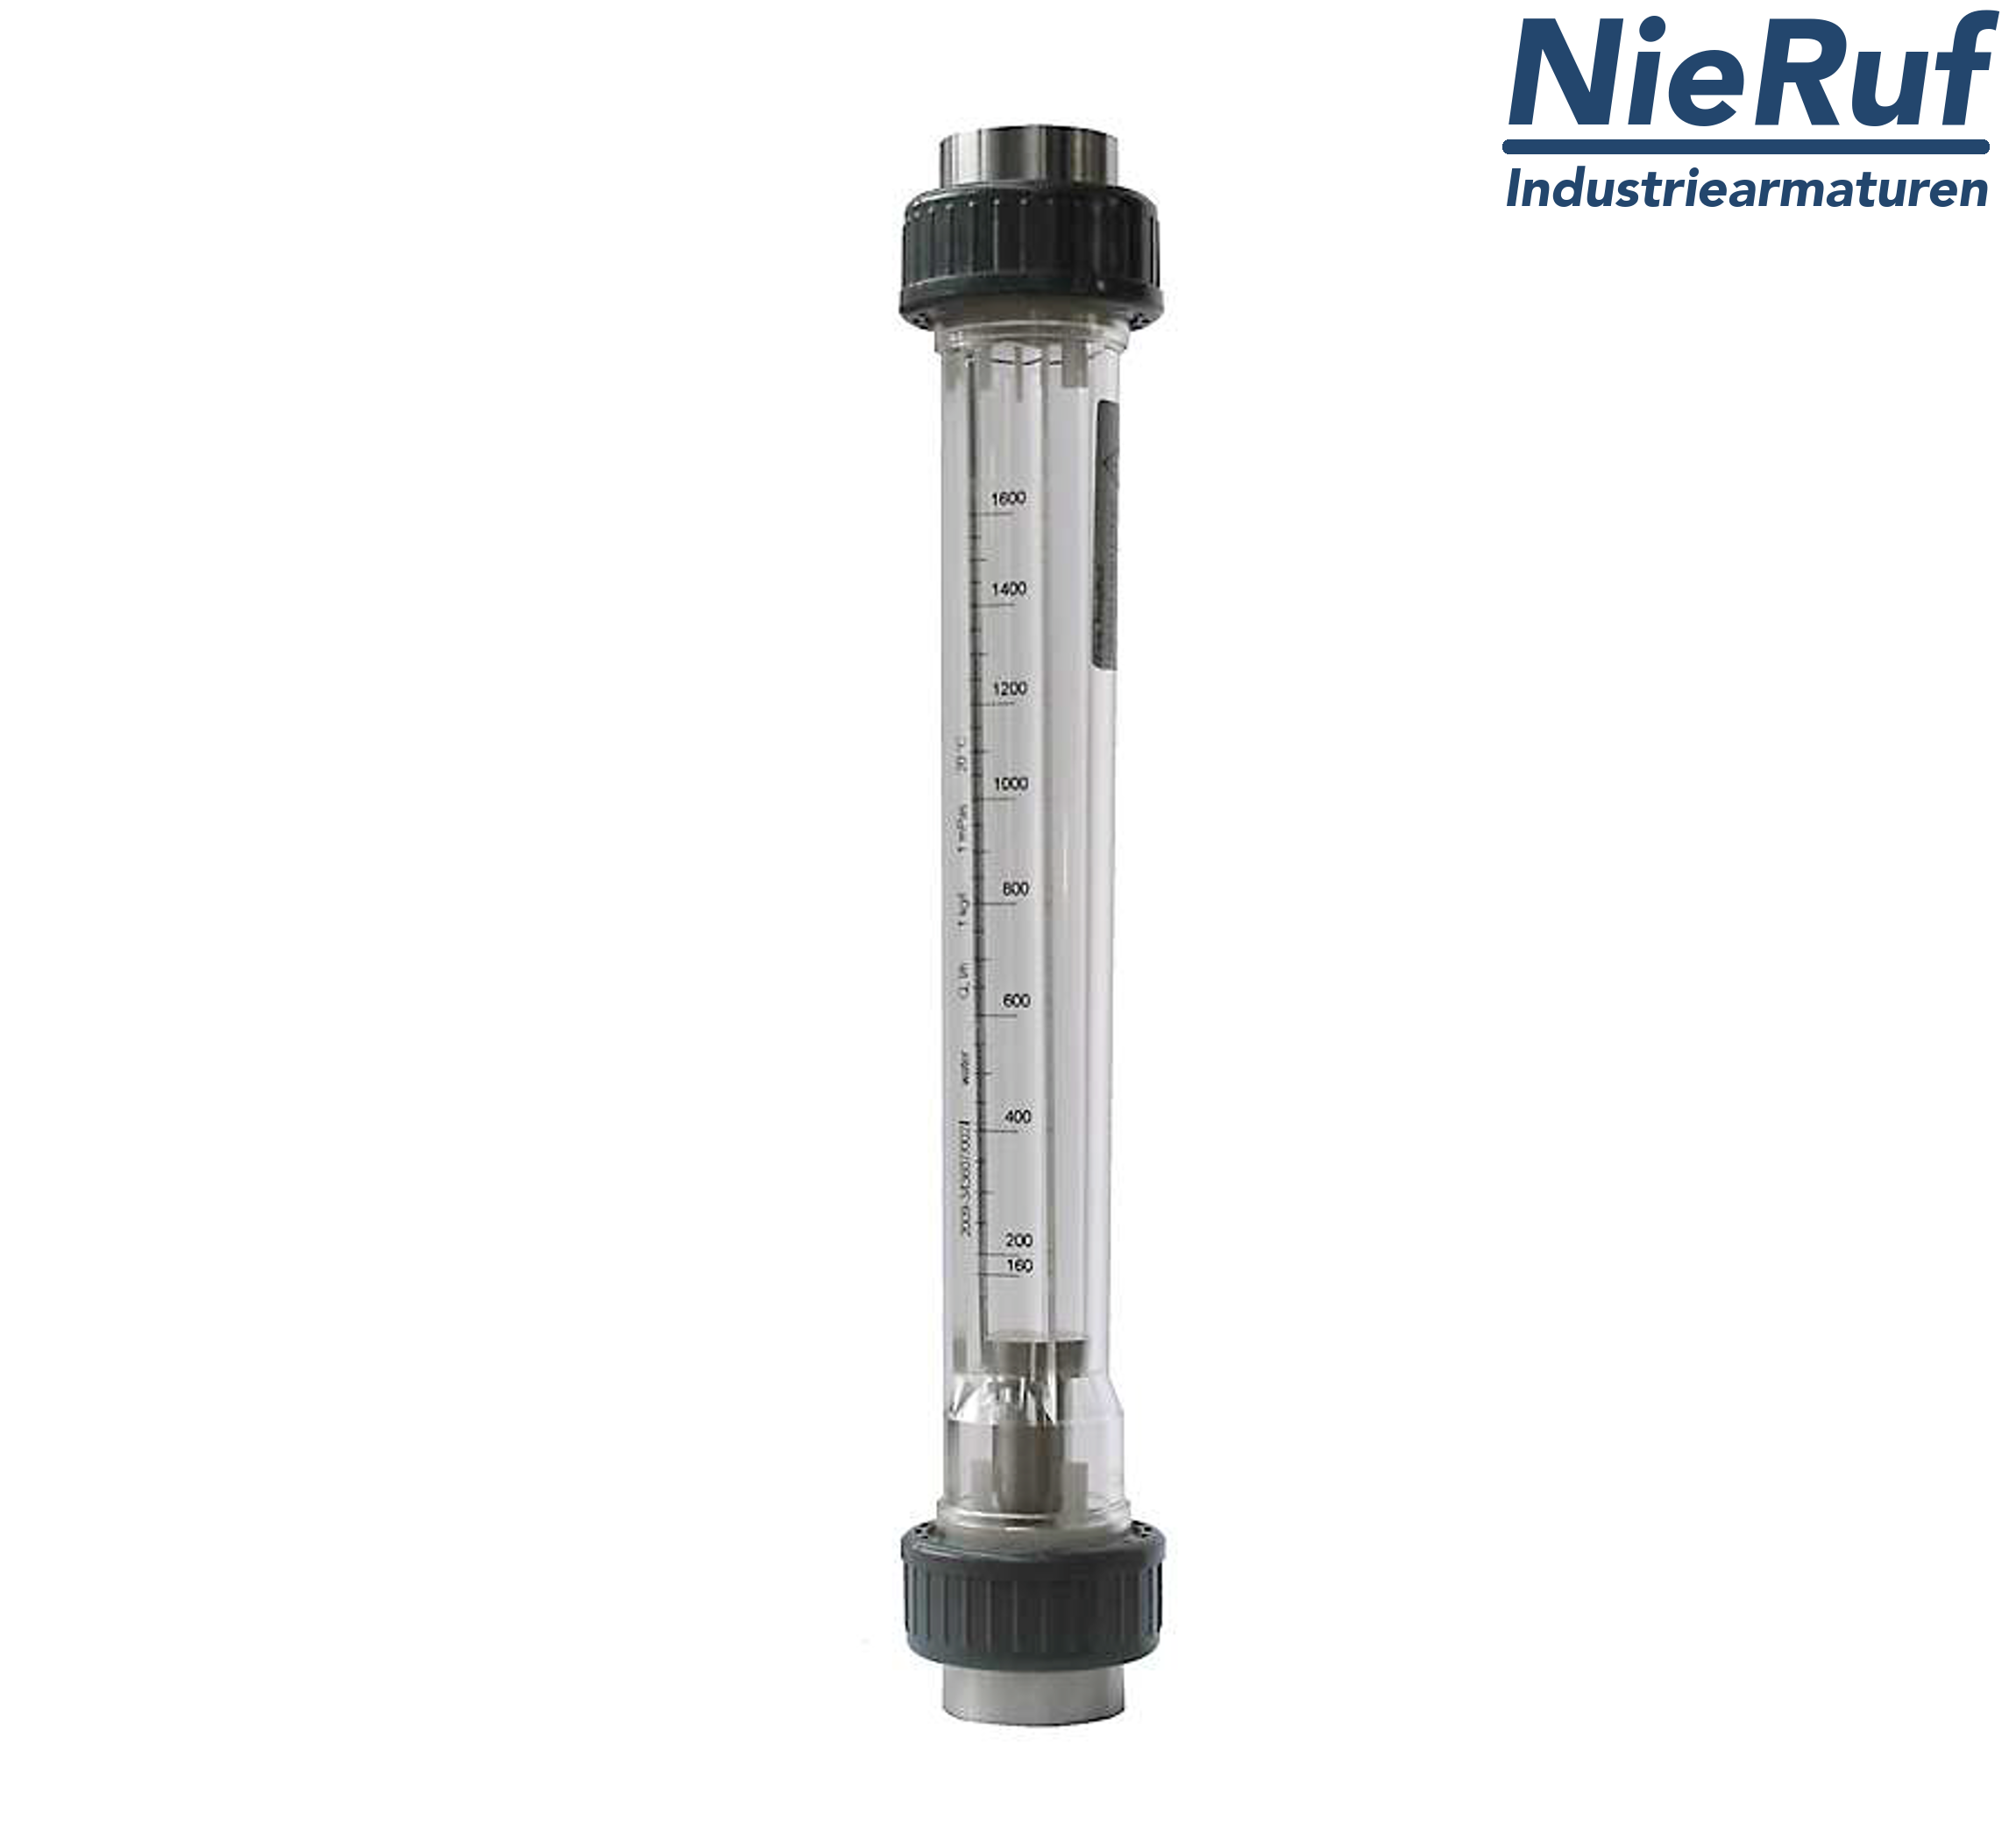 Variable area flowmeter 3/4" inch 100.0 - 1000 l/h water NBR